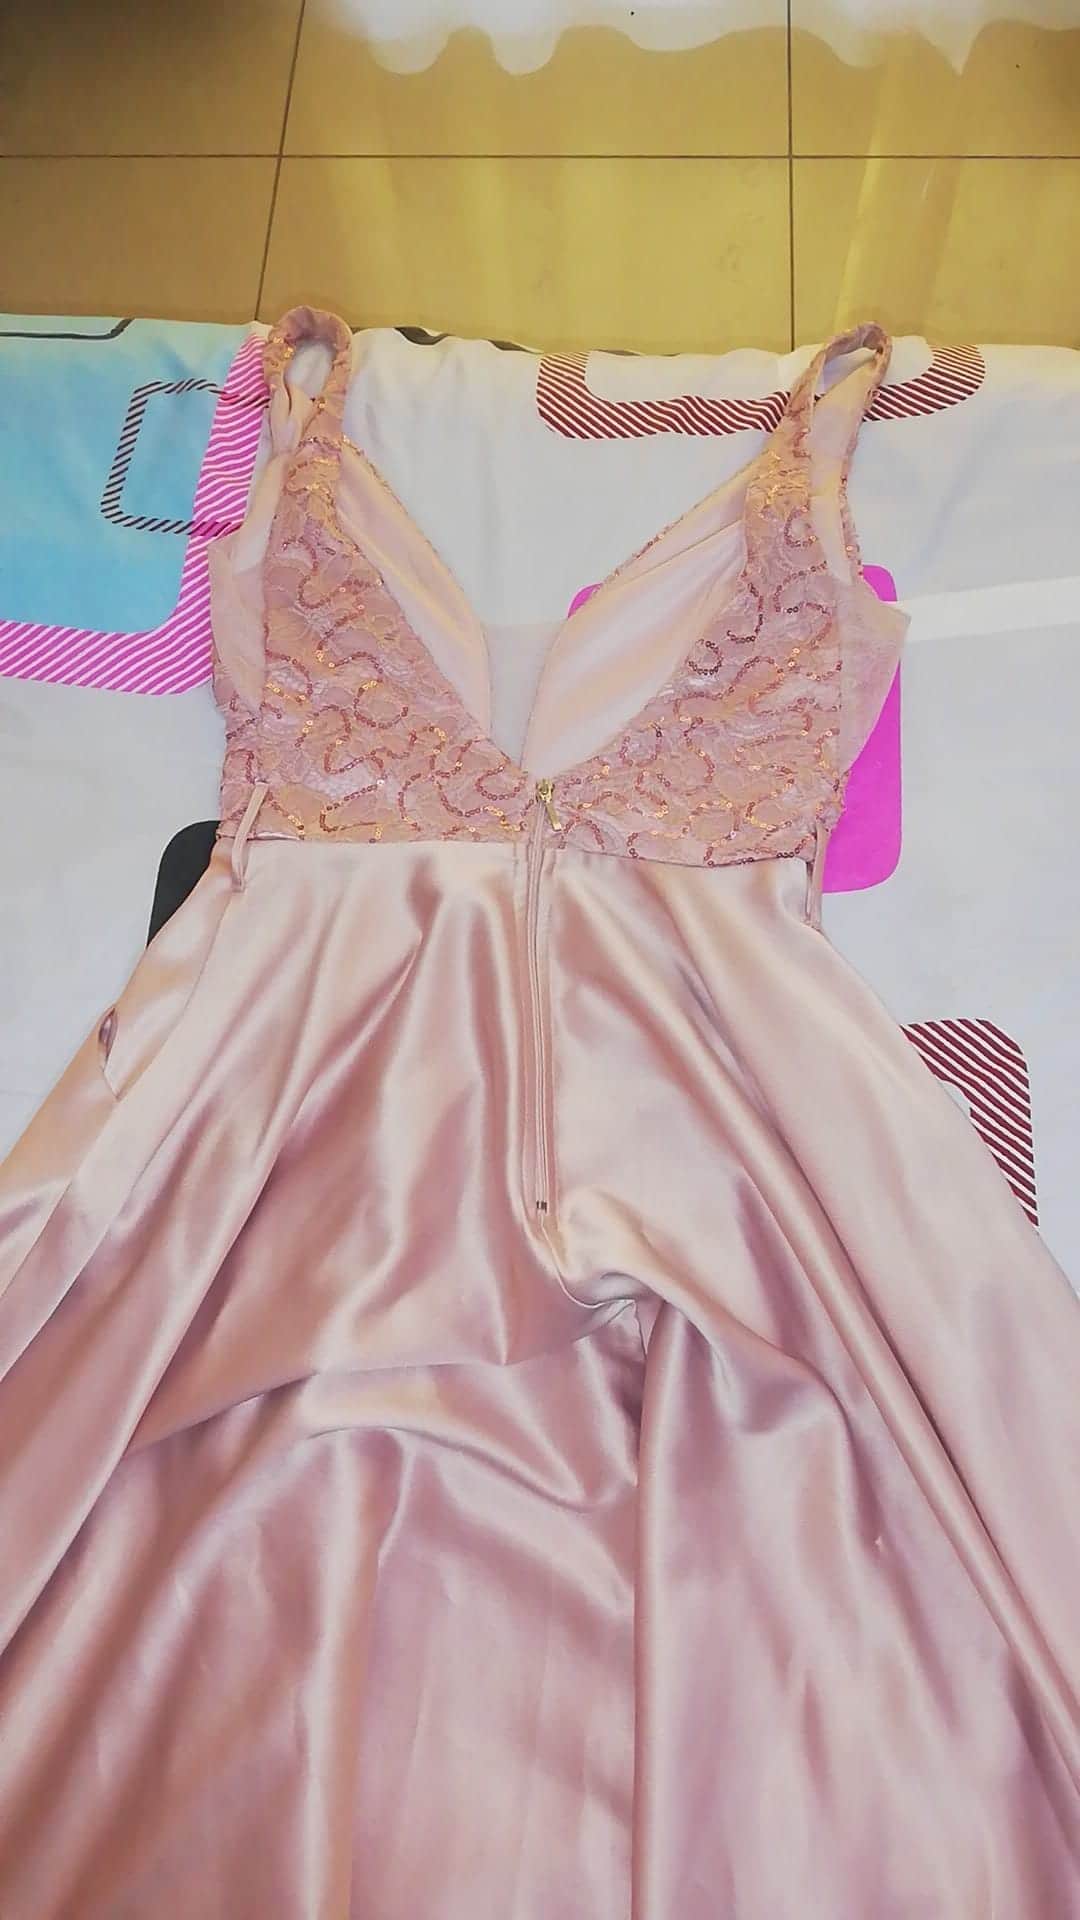 Dress for sale | Junk Mail